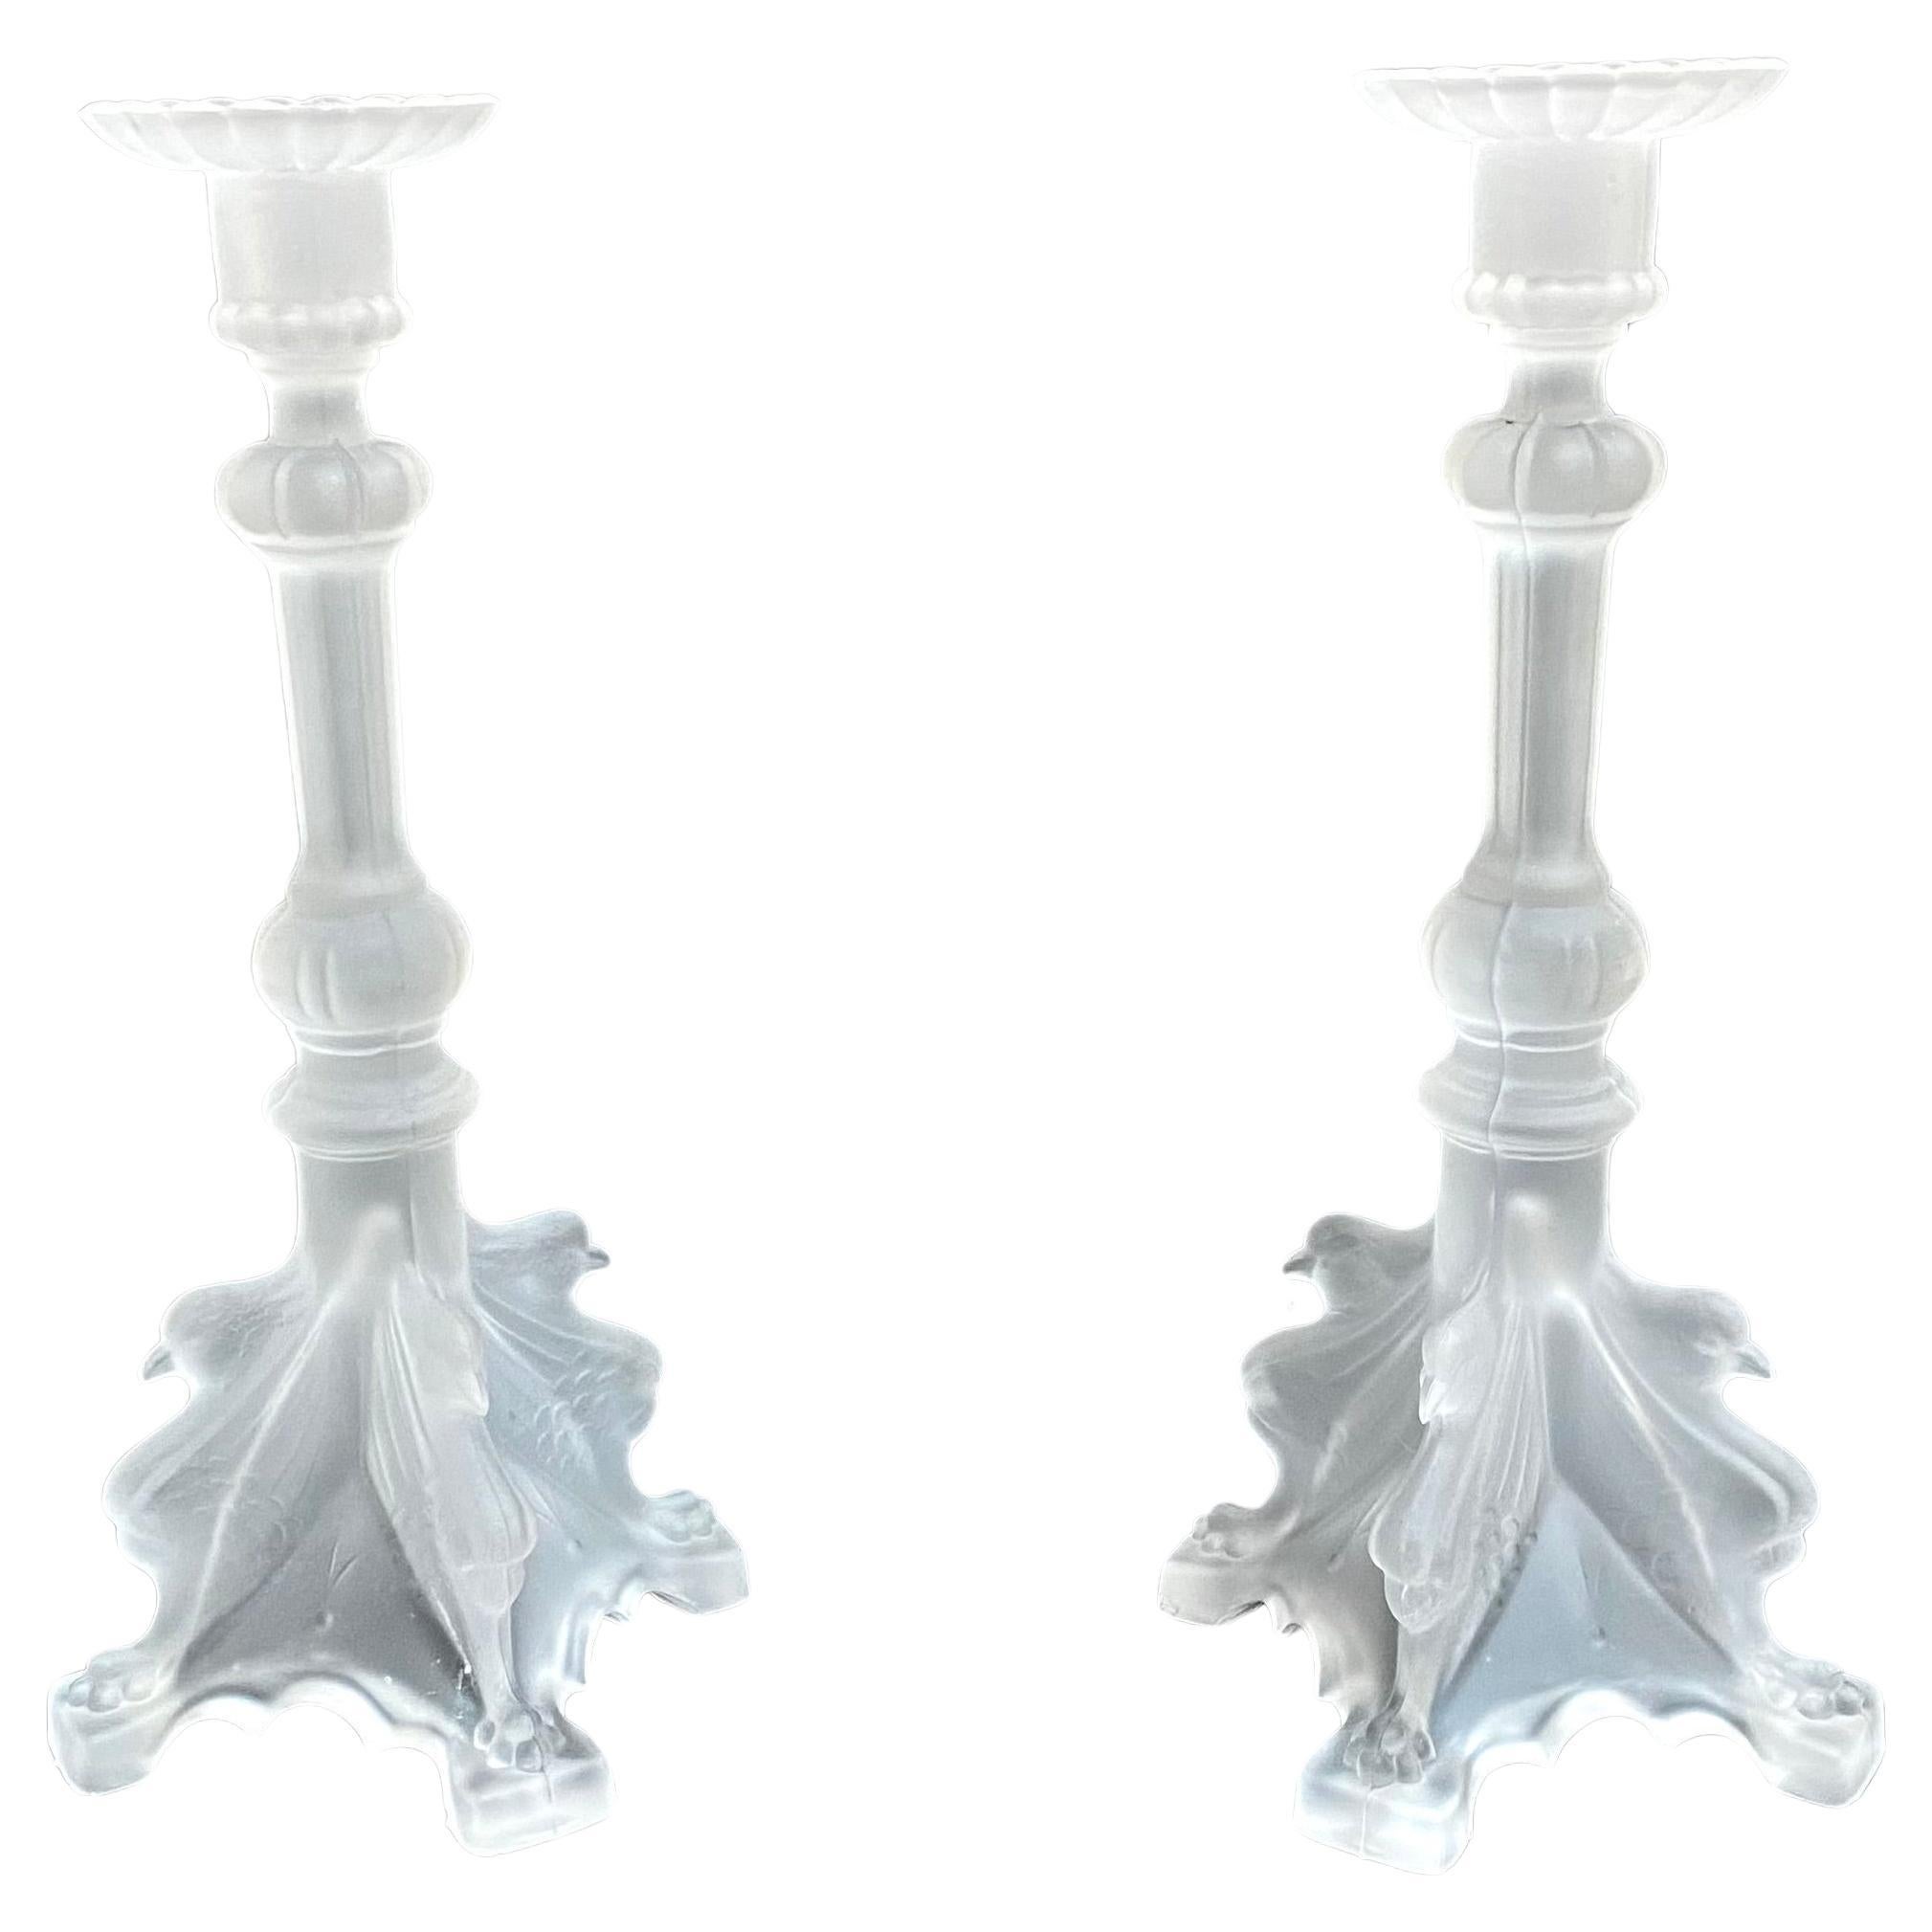 Lalique Style Vintage Candlesticks in Frosted Glass, Set 2, France, 1960s For Sale